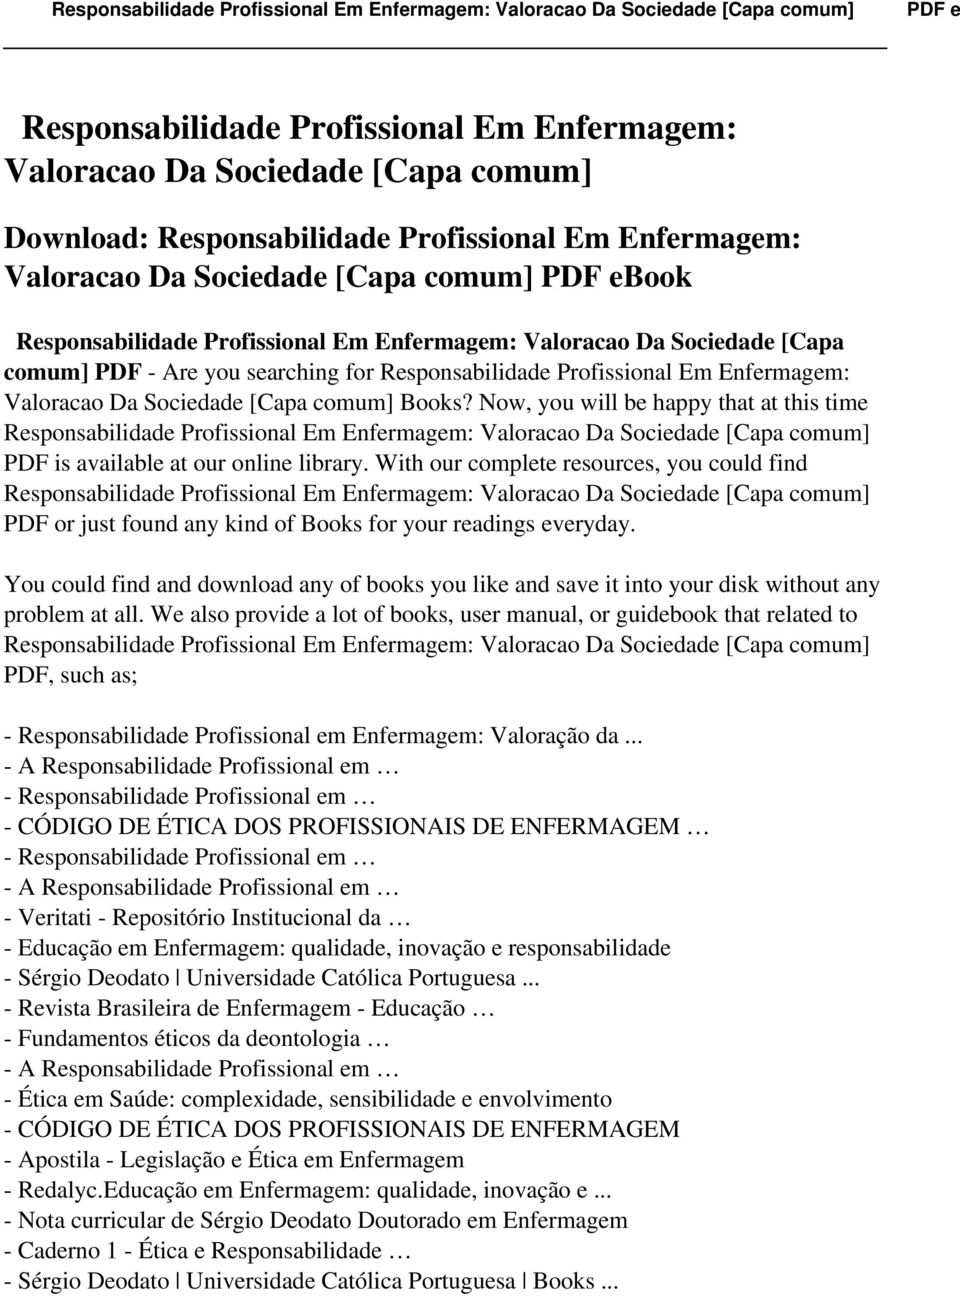 Now, you will be happy that at this time Responsabilidade Profissional Em Enfermagem: Valoracao Da Sociedade [Capa comum] PDF is available at our online library.